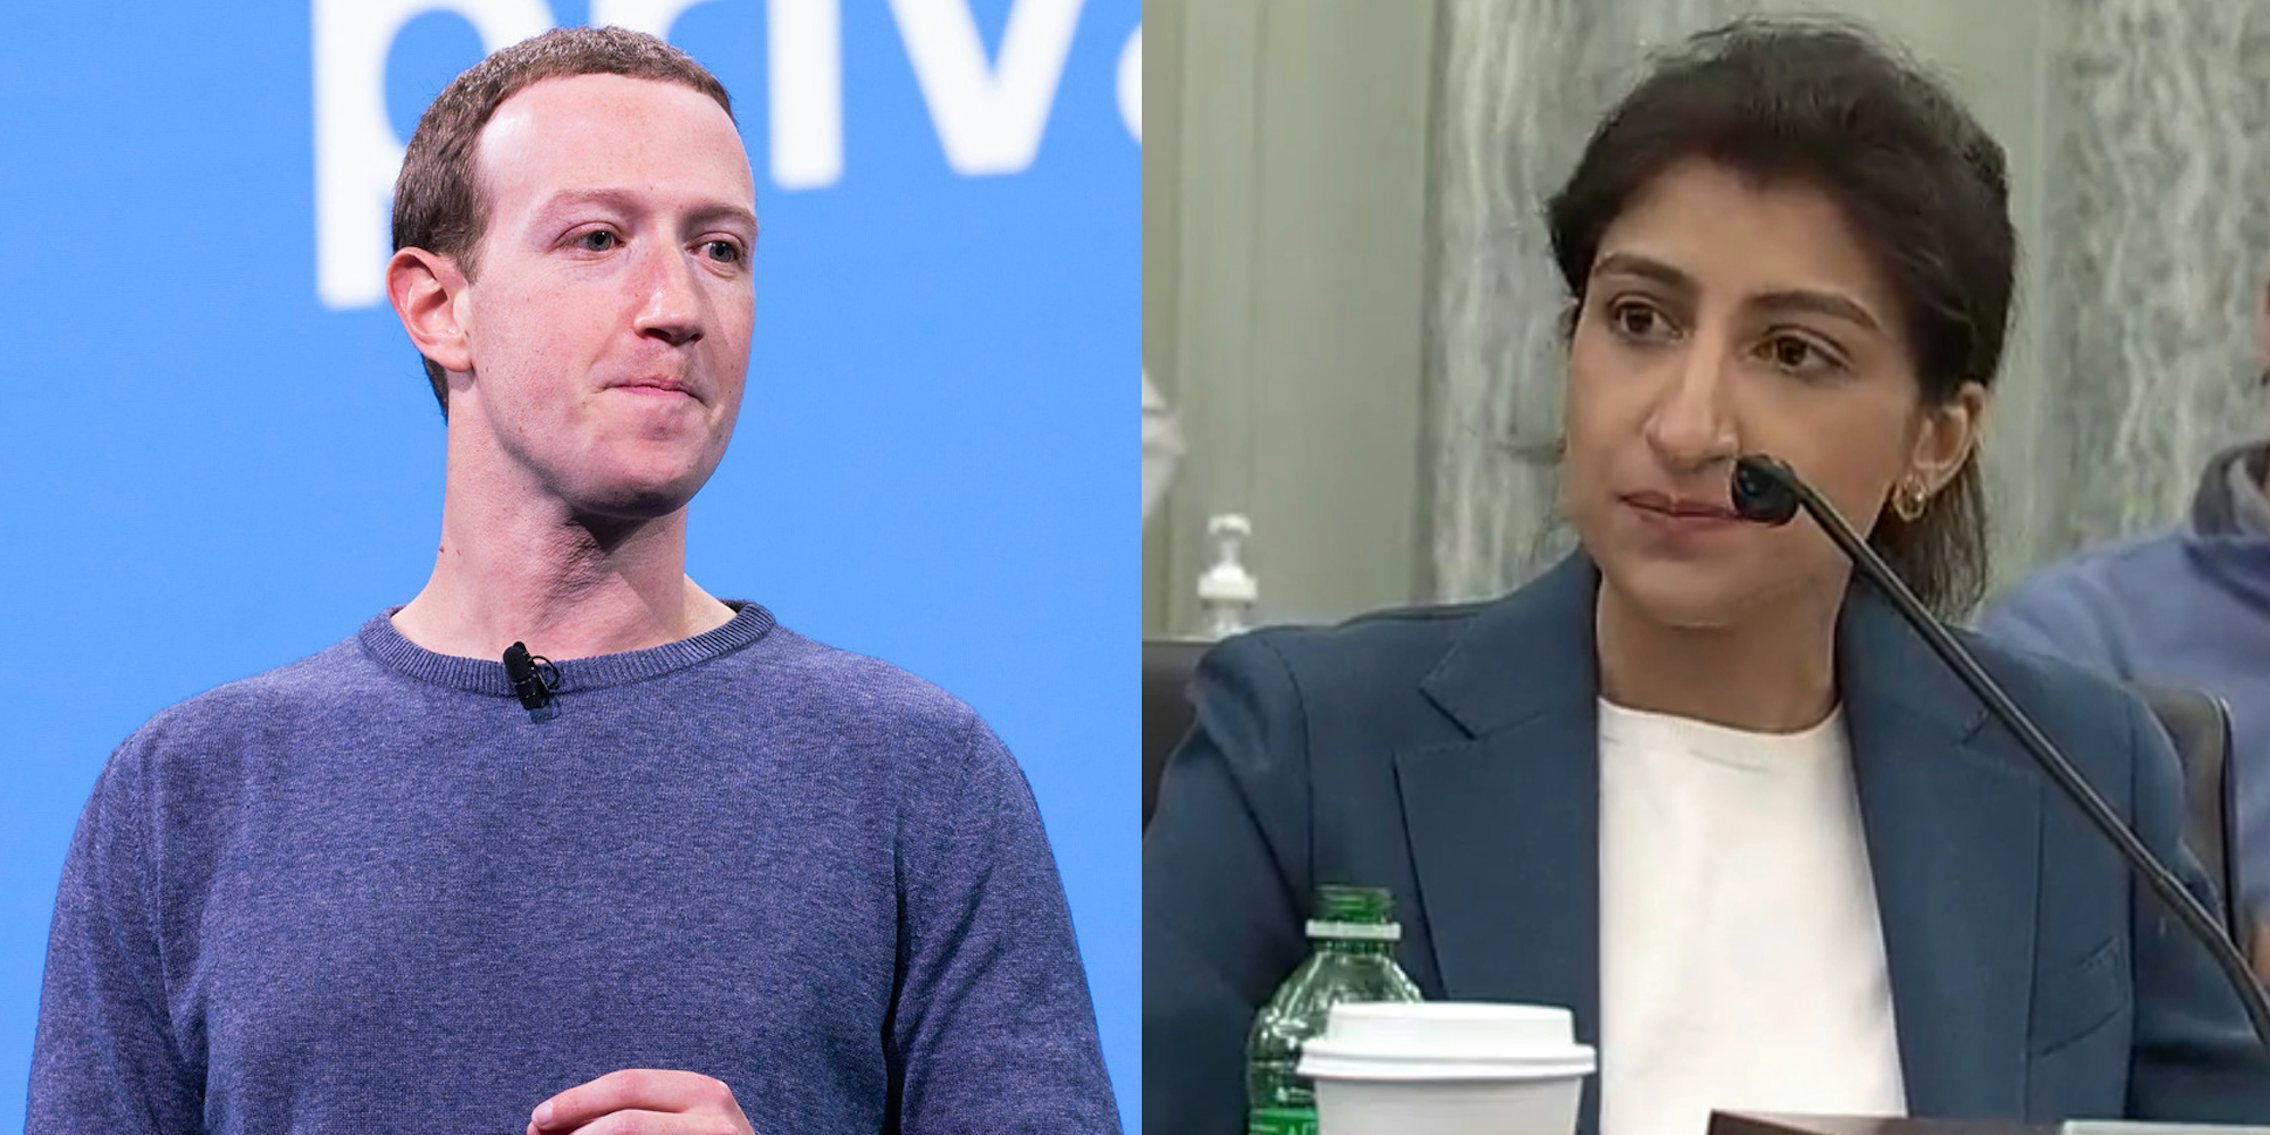 A side by side of Facebook CEO Mark Zuckerberg and FTC Chairwoman Lina Khan.